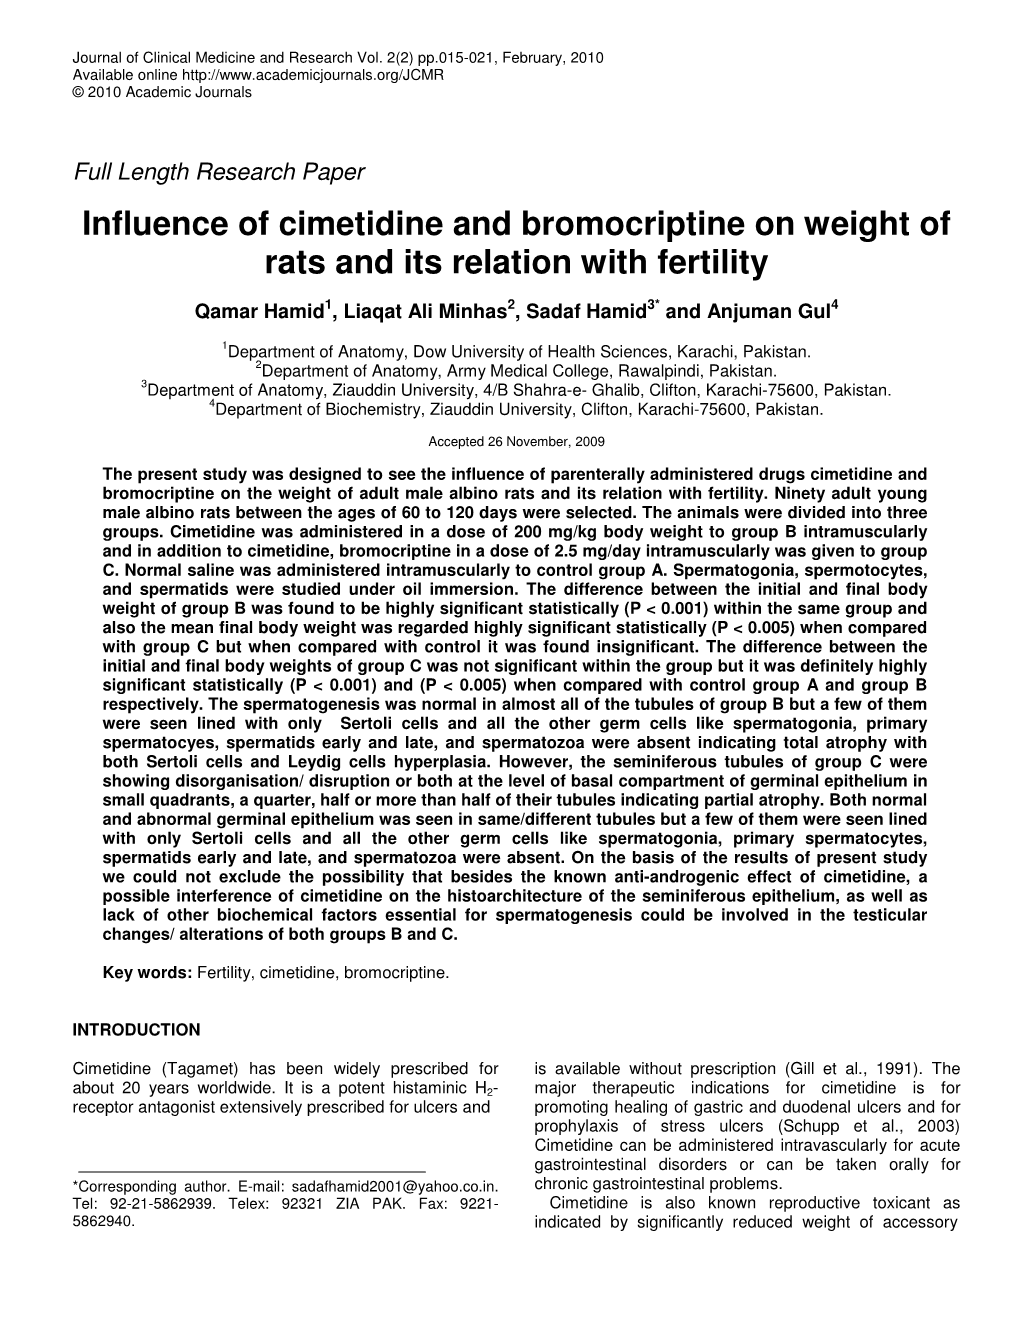 Influence of Cimetidine and Bromocriptine on Weight of Rats and Its Relation with Fertility